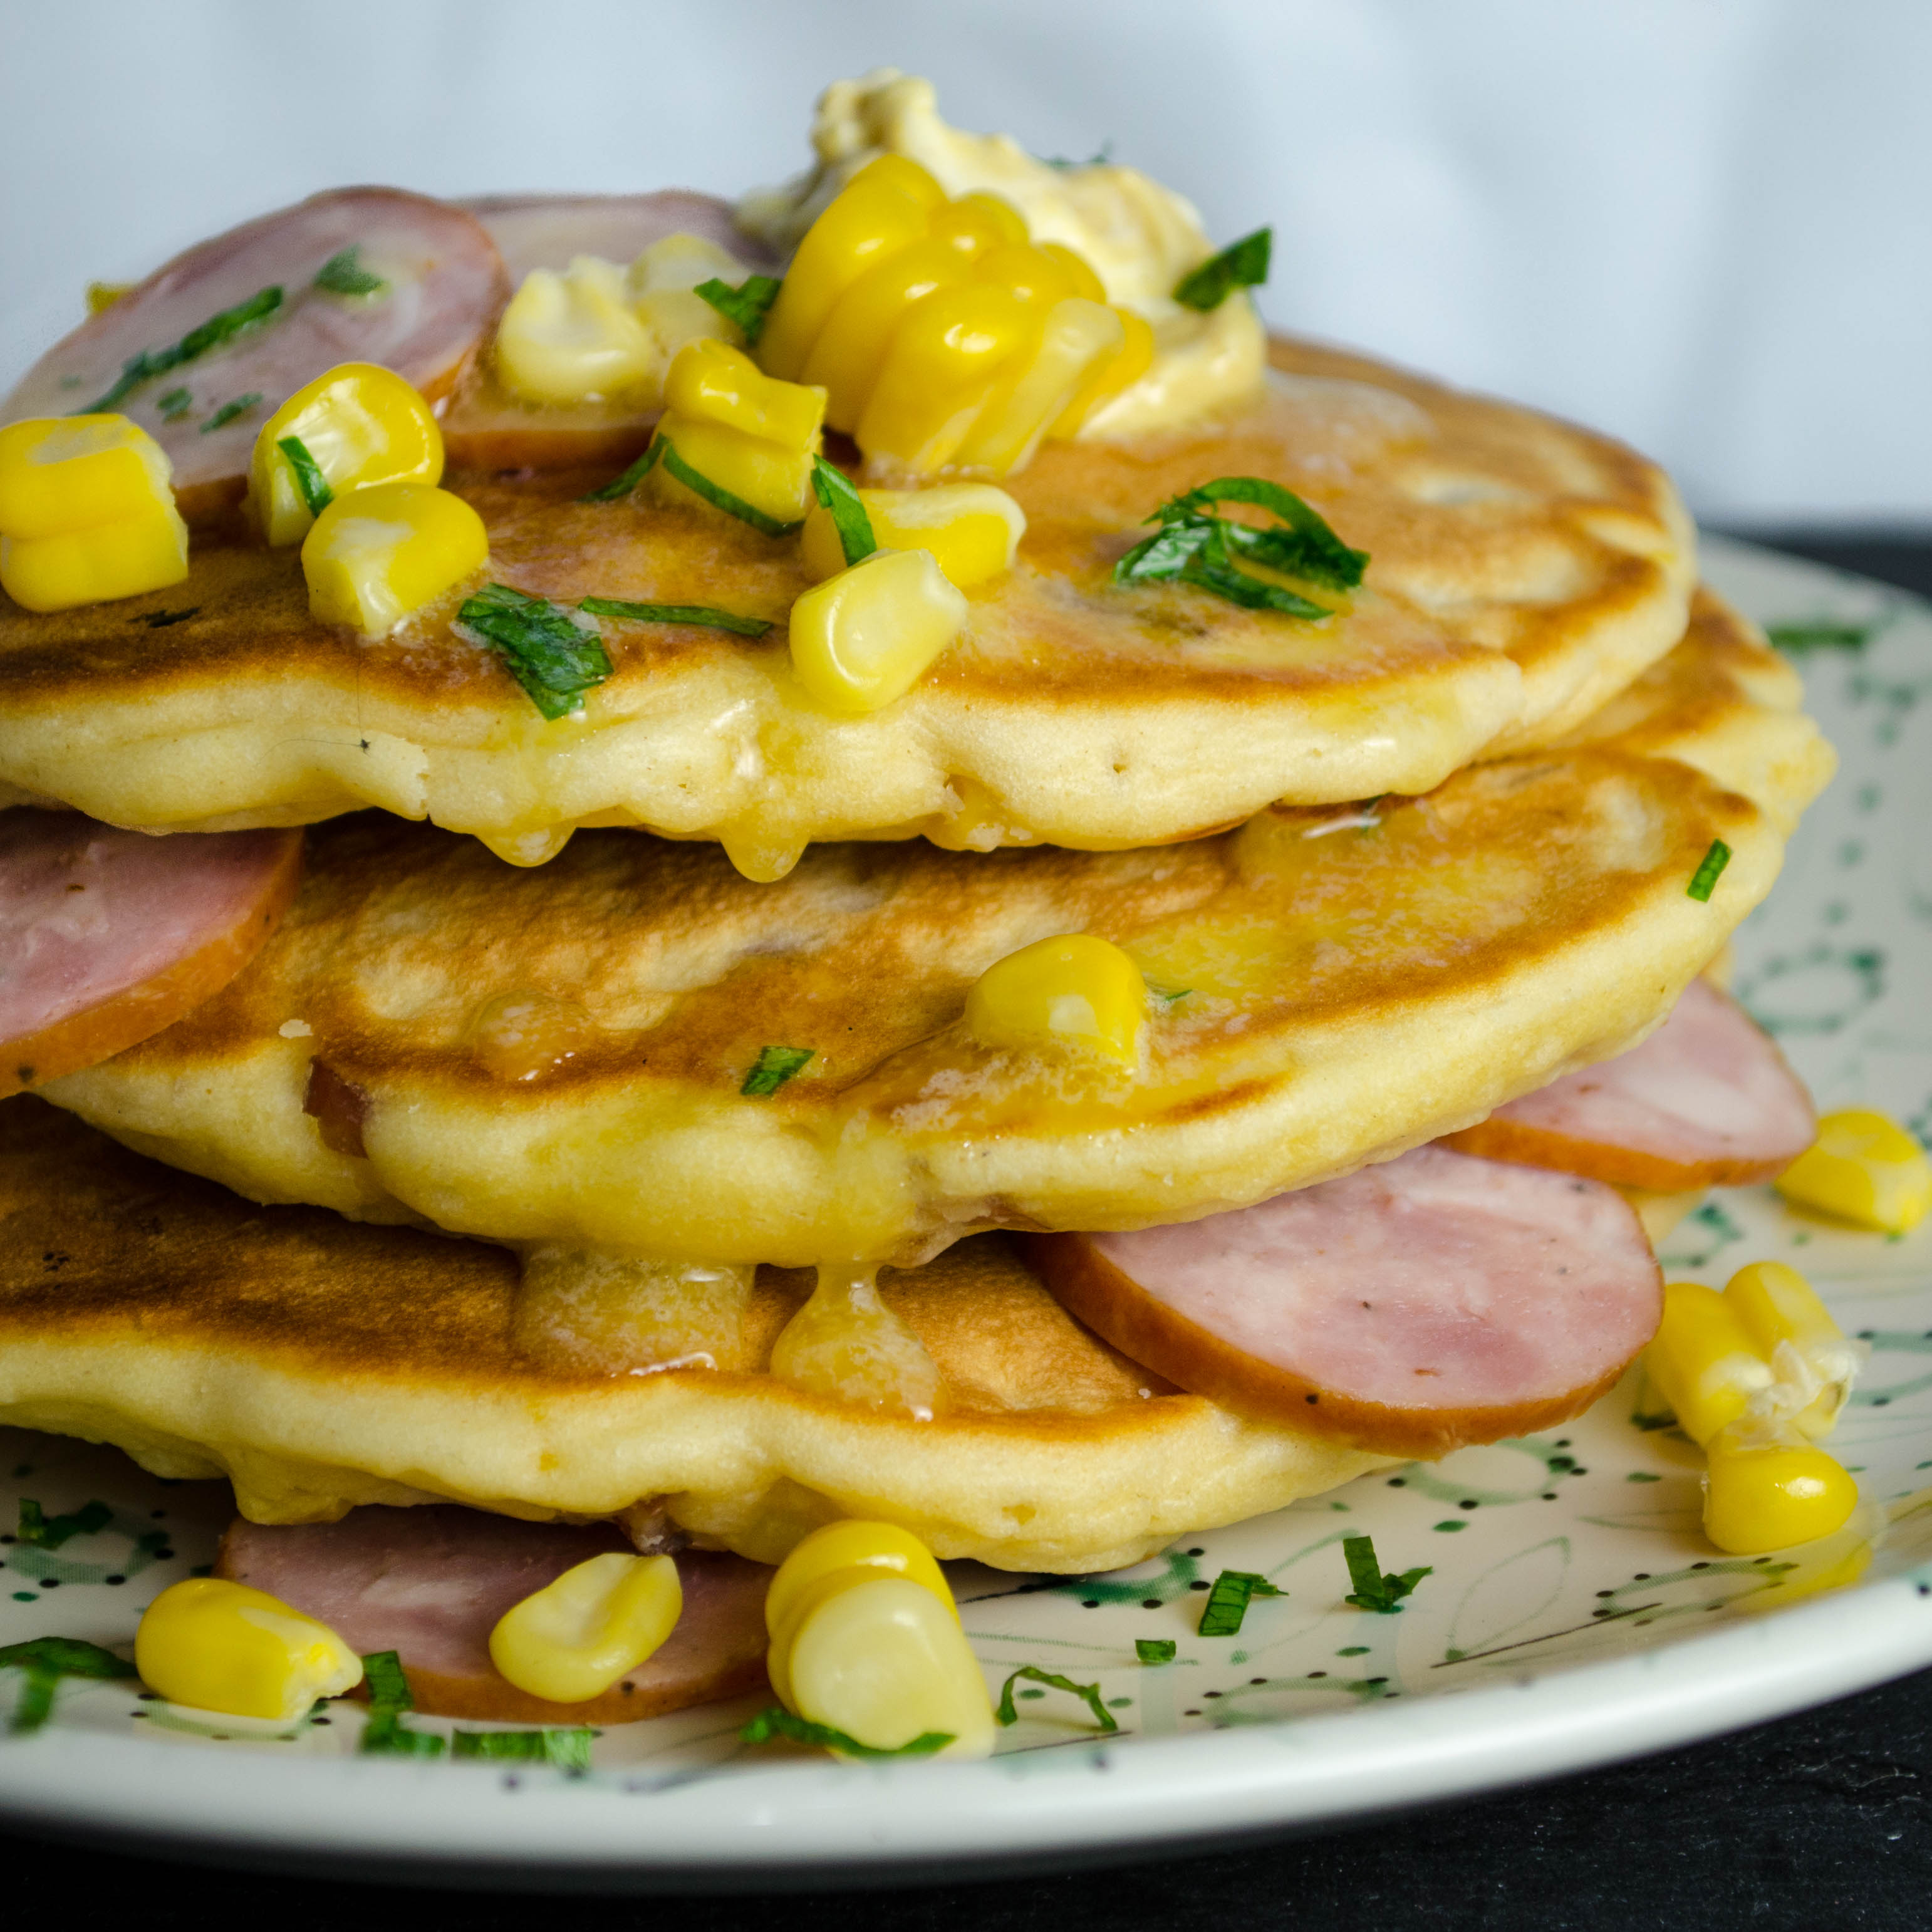 A stack of kielbasa and corn pancakes on a floral patterned plate